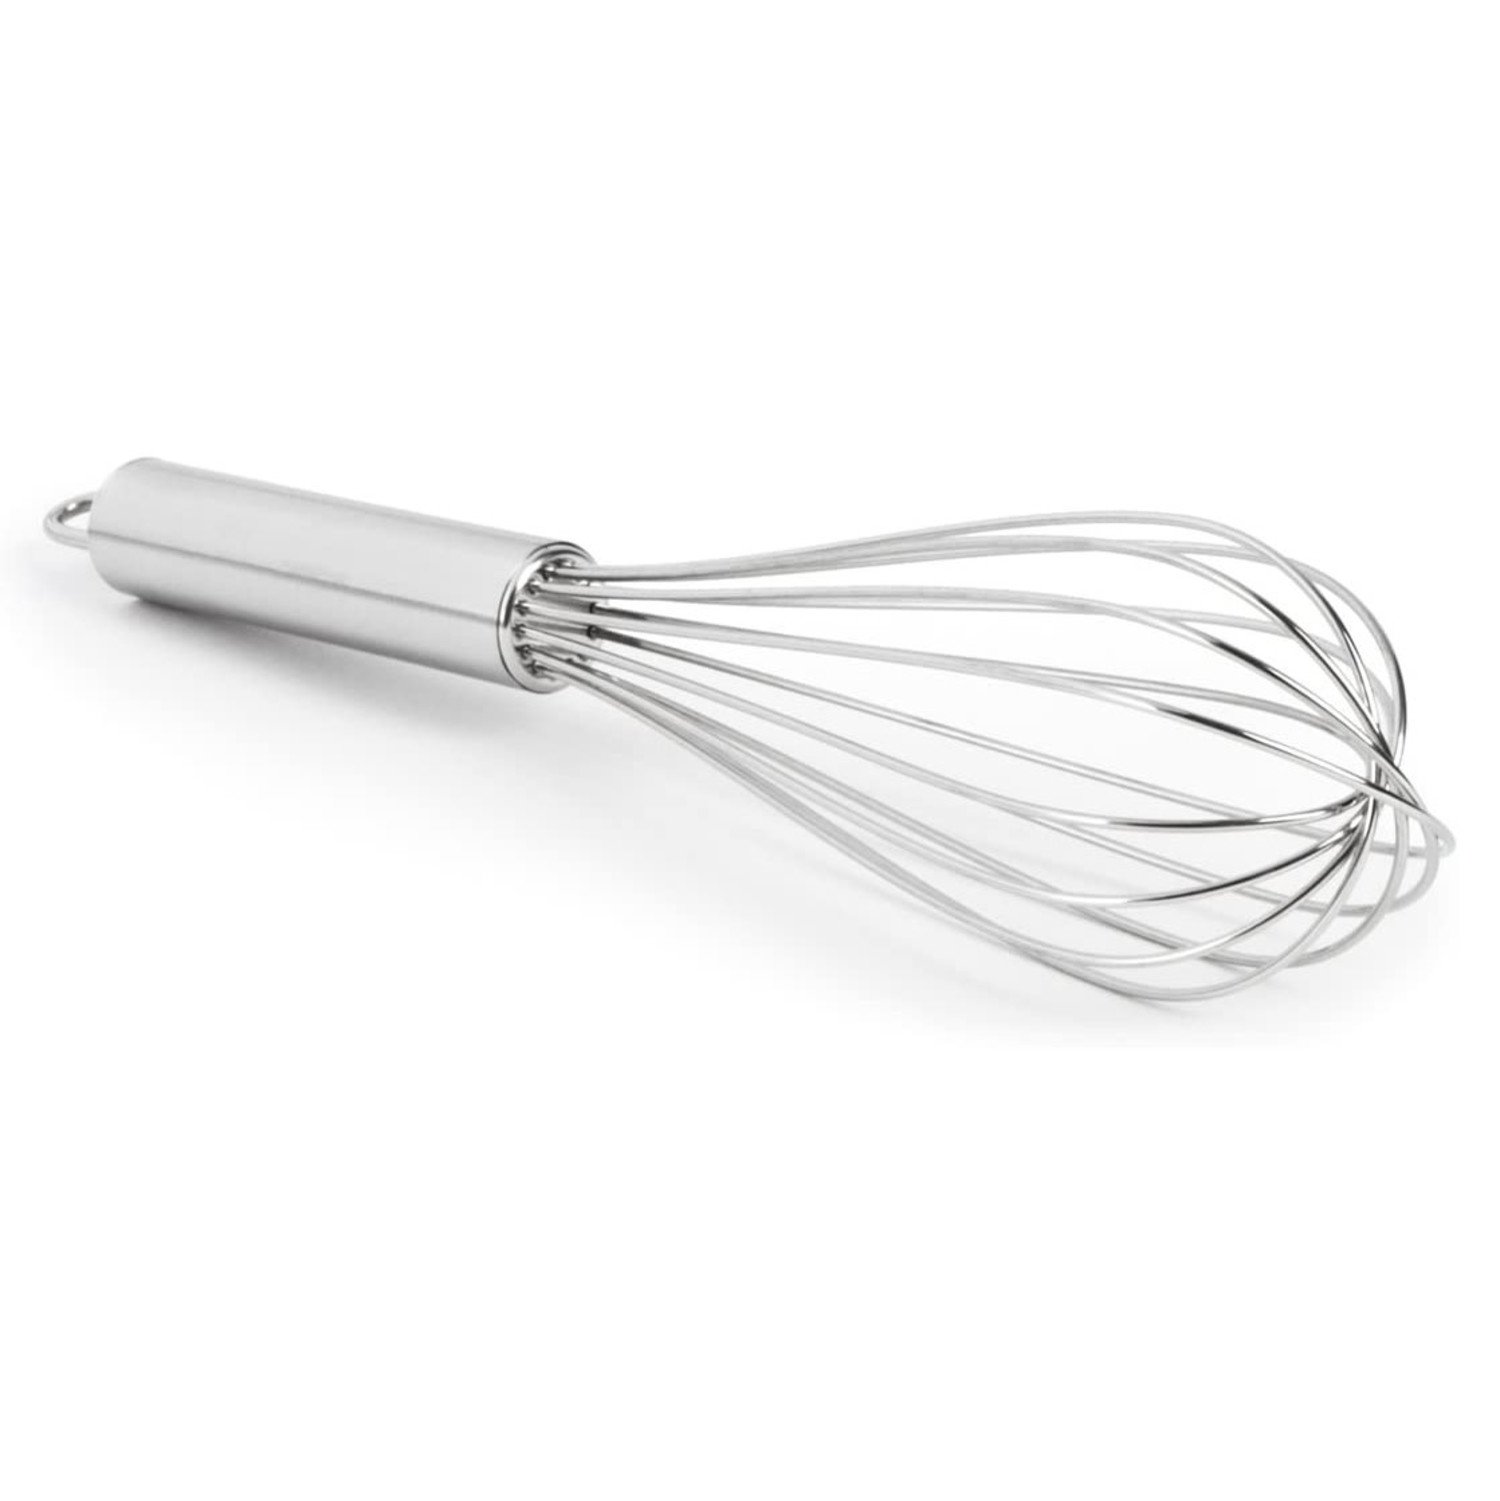 8 - 22 Inches Stainless Steel Egg Whisk (All Size) — AlatDapur